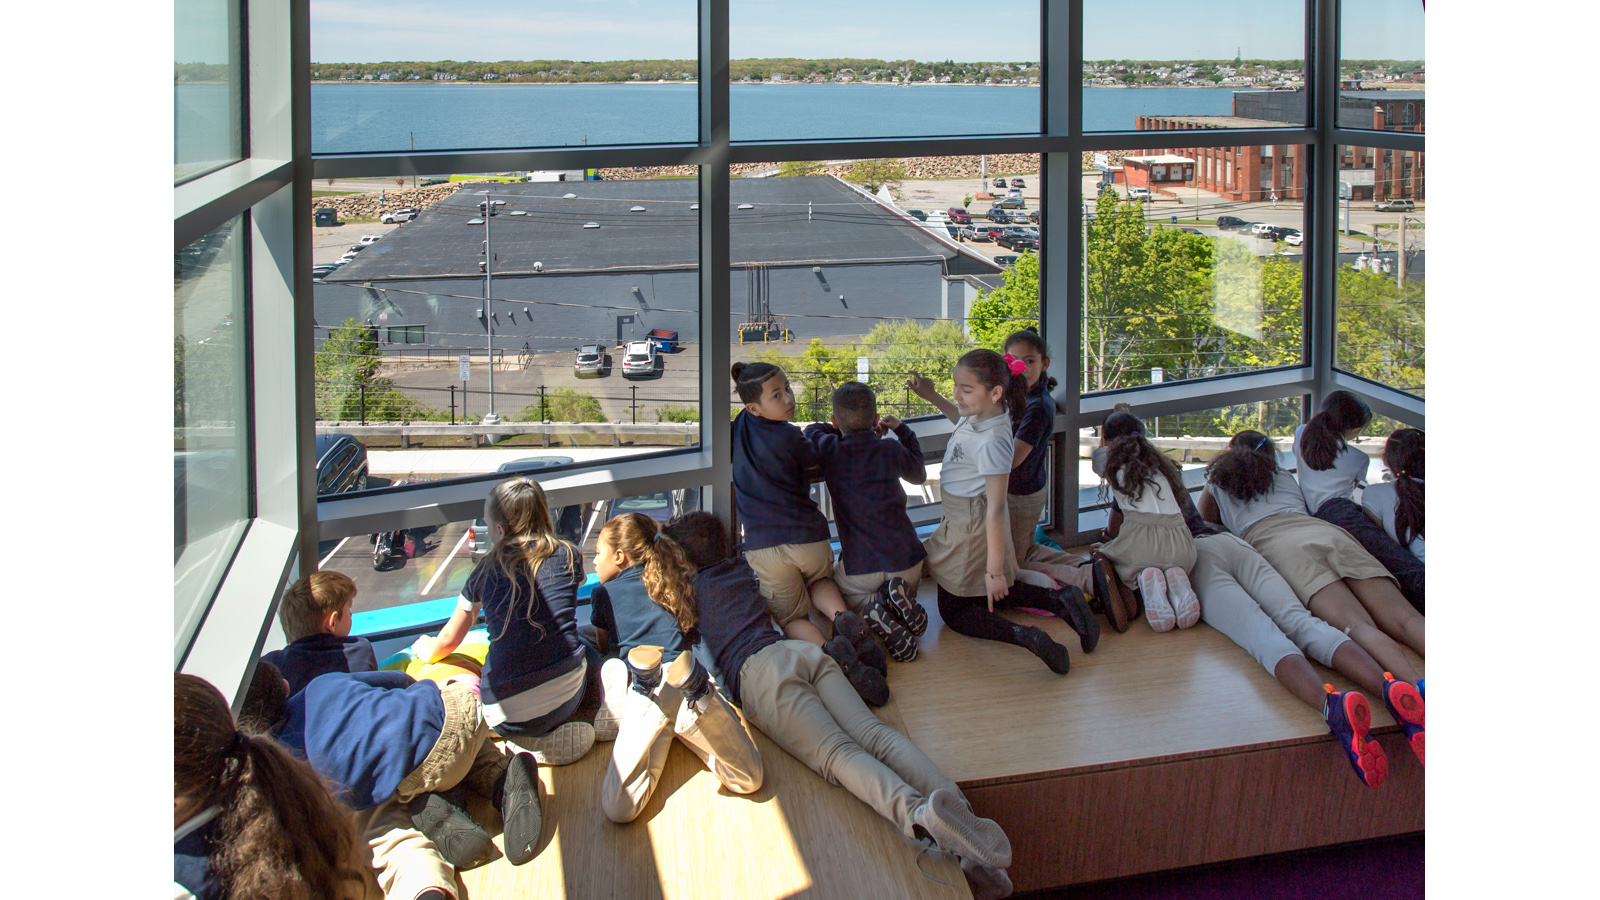 Irwin Jacobs Elementary School Interior, children look out of a window looking at the river